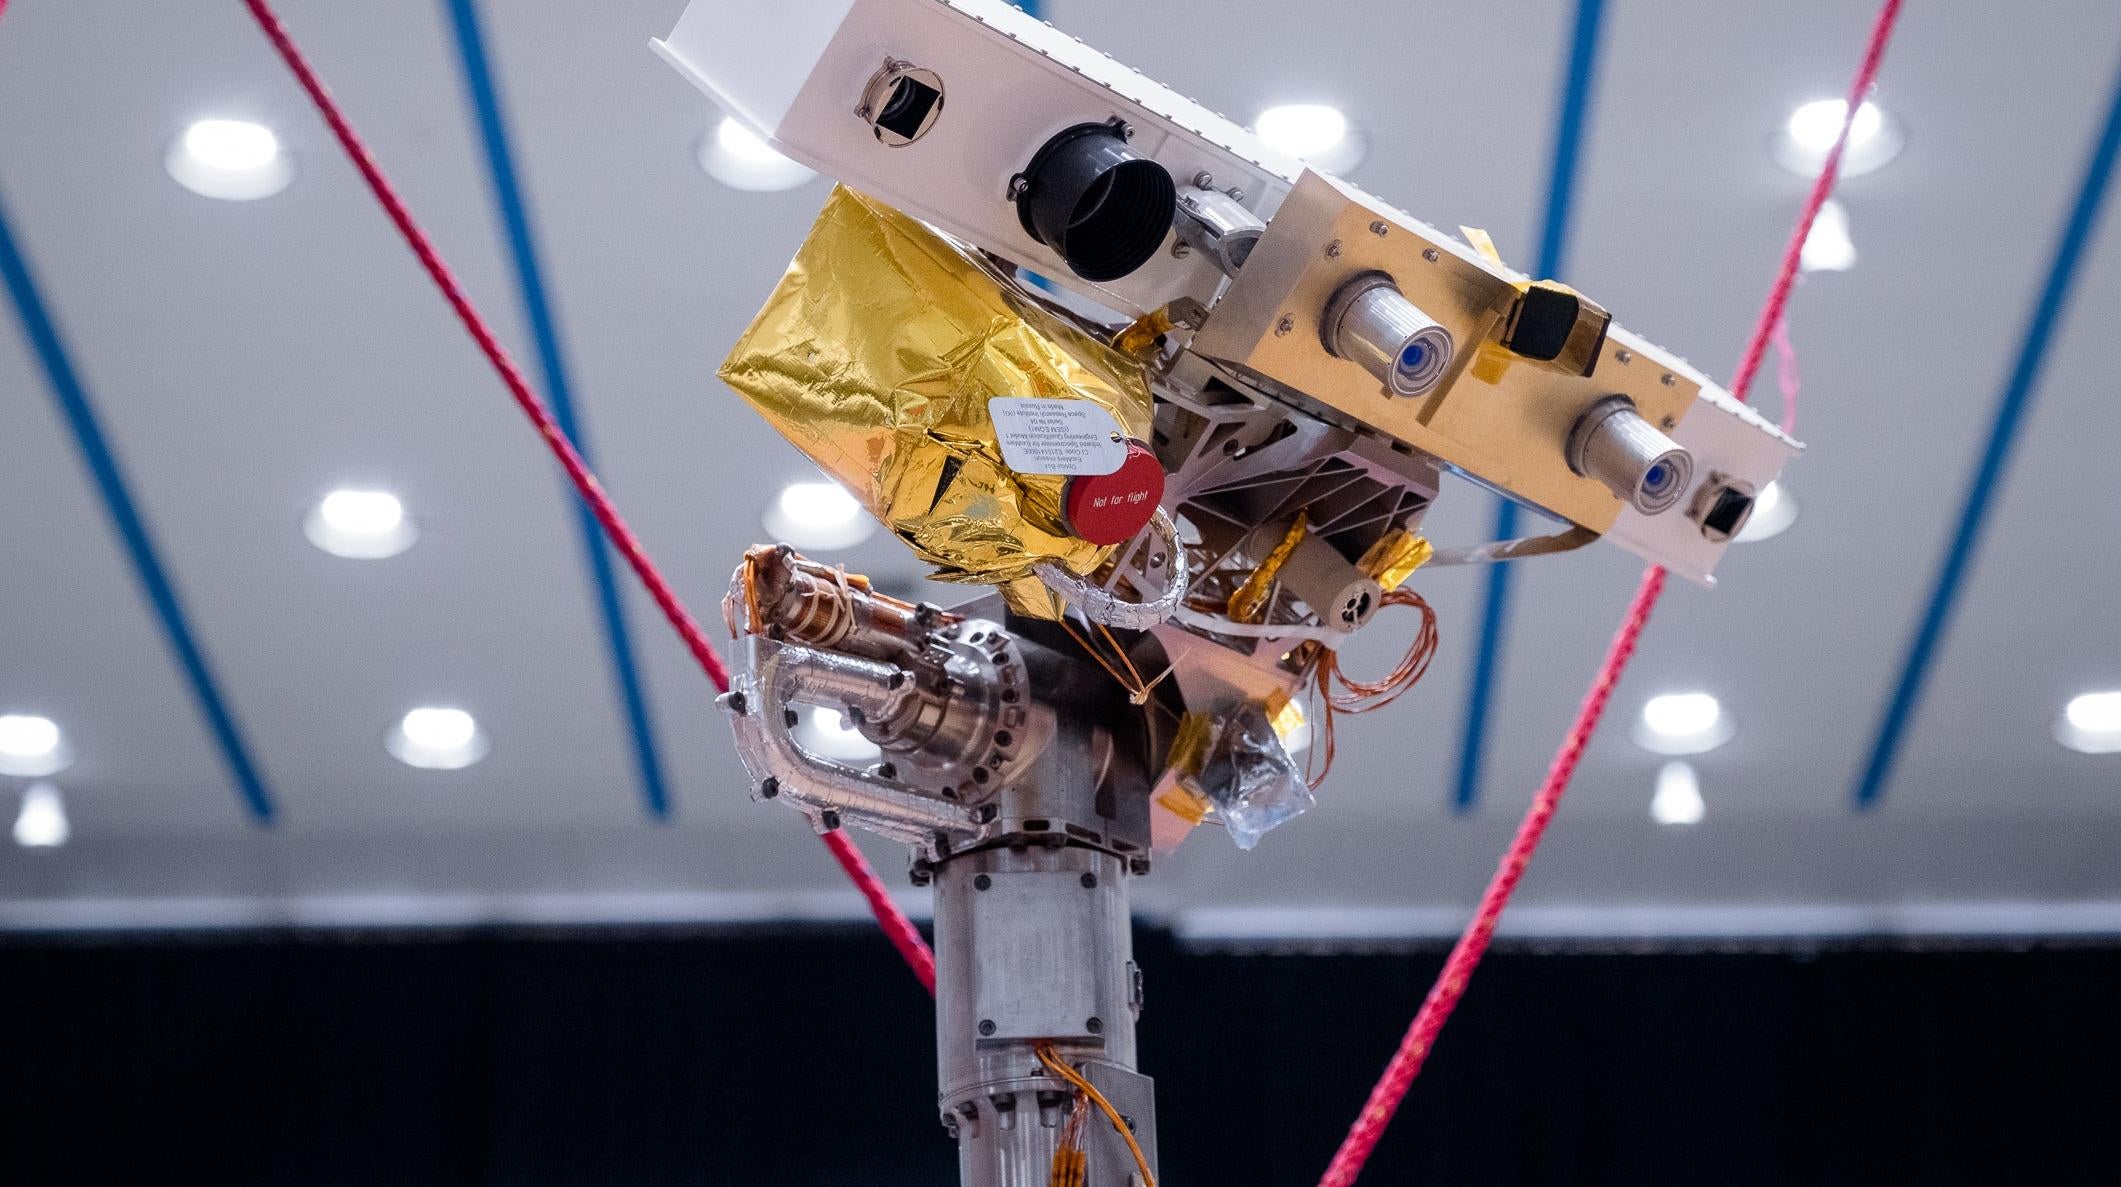 The rover is equipped with two cameras that allow it to see in 3D. (Photo: ESA)